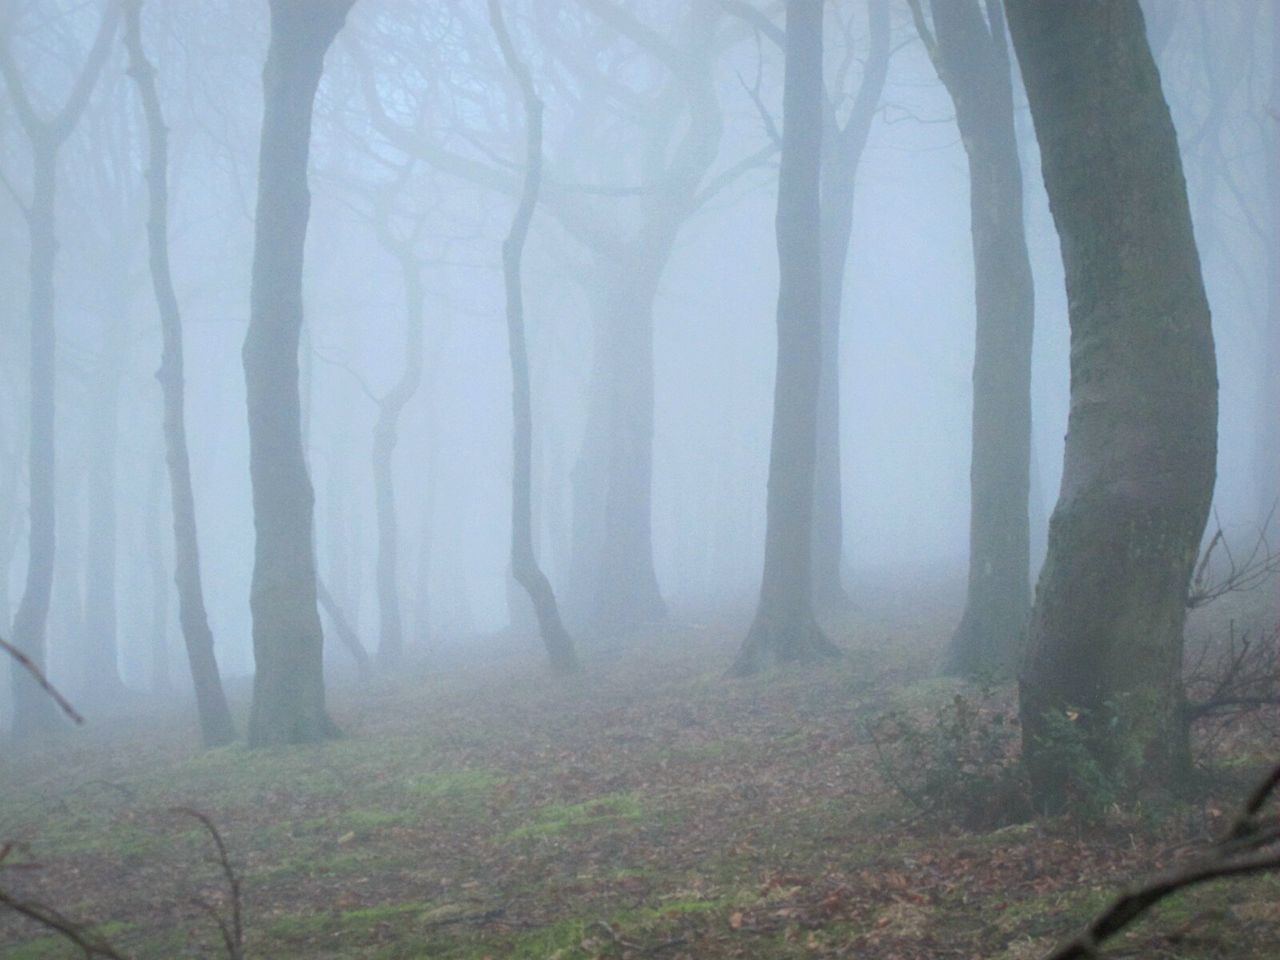 TREES IN FOREST AGAINST FOGGY WEATHER